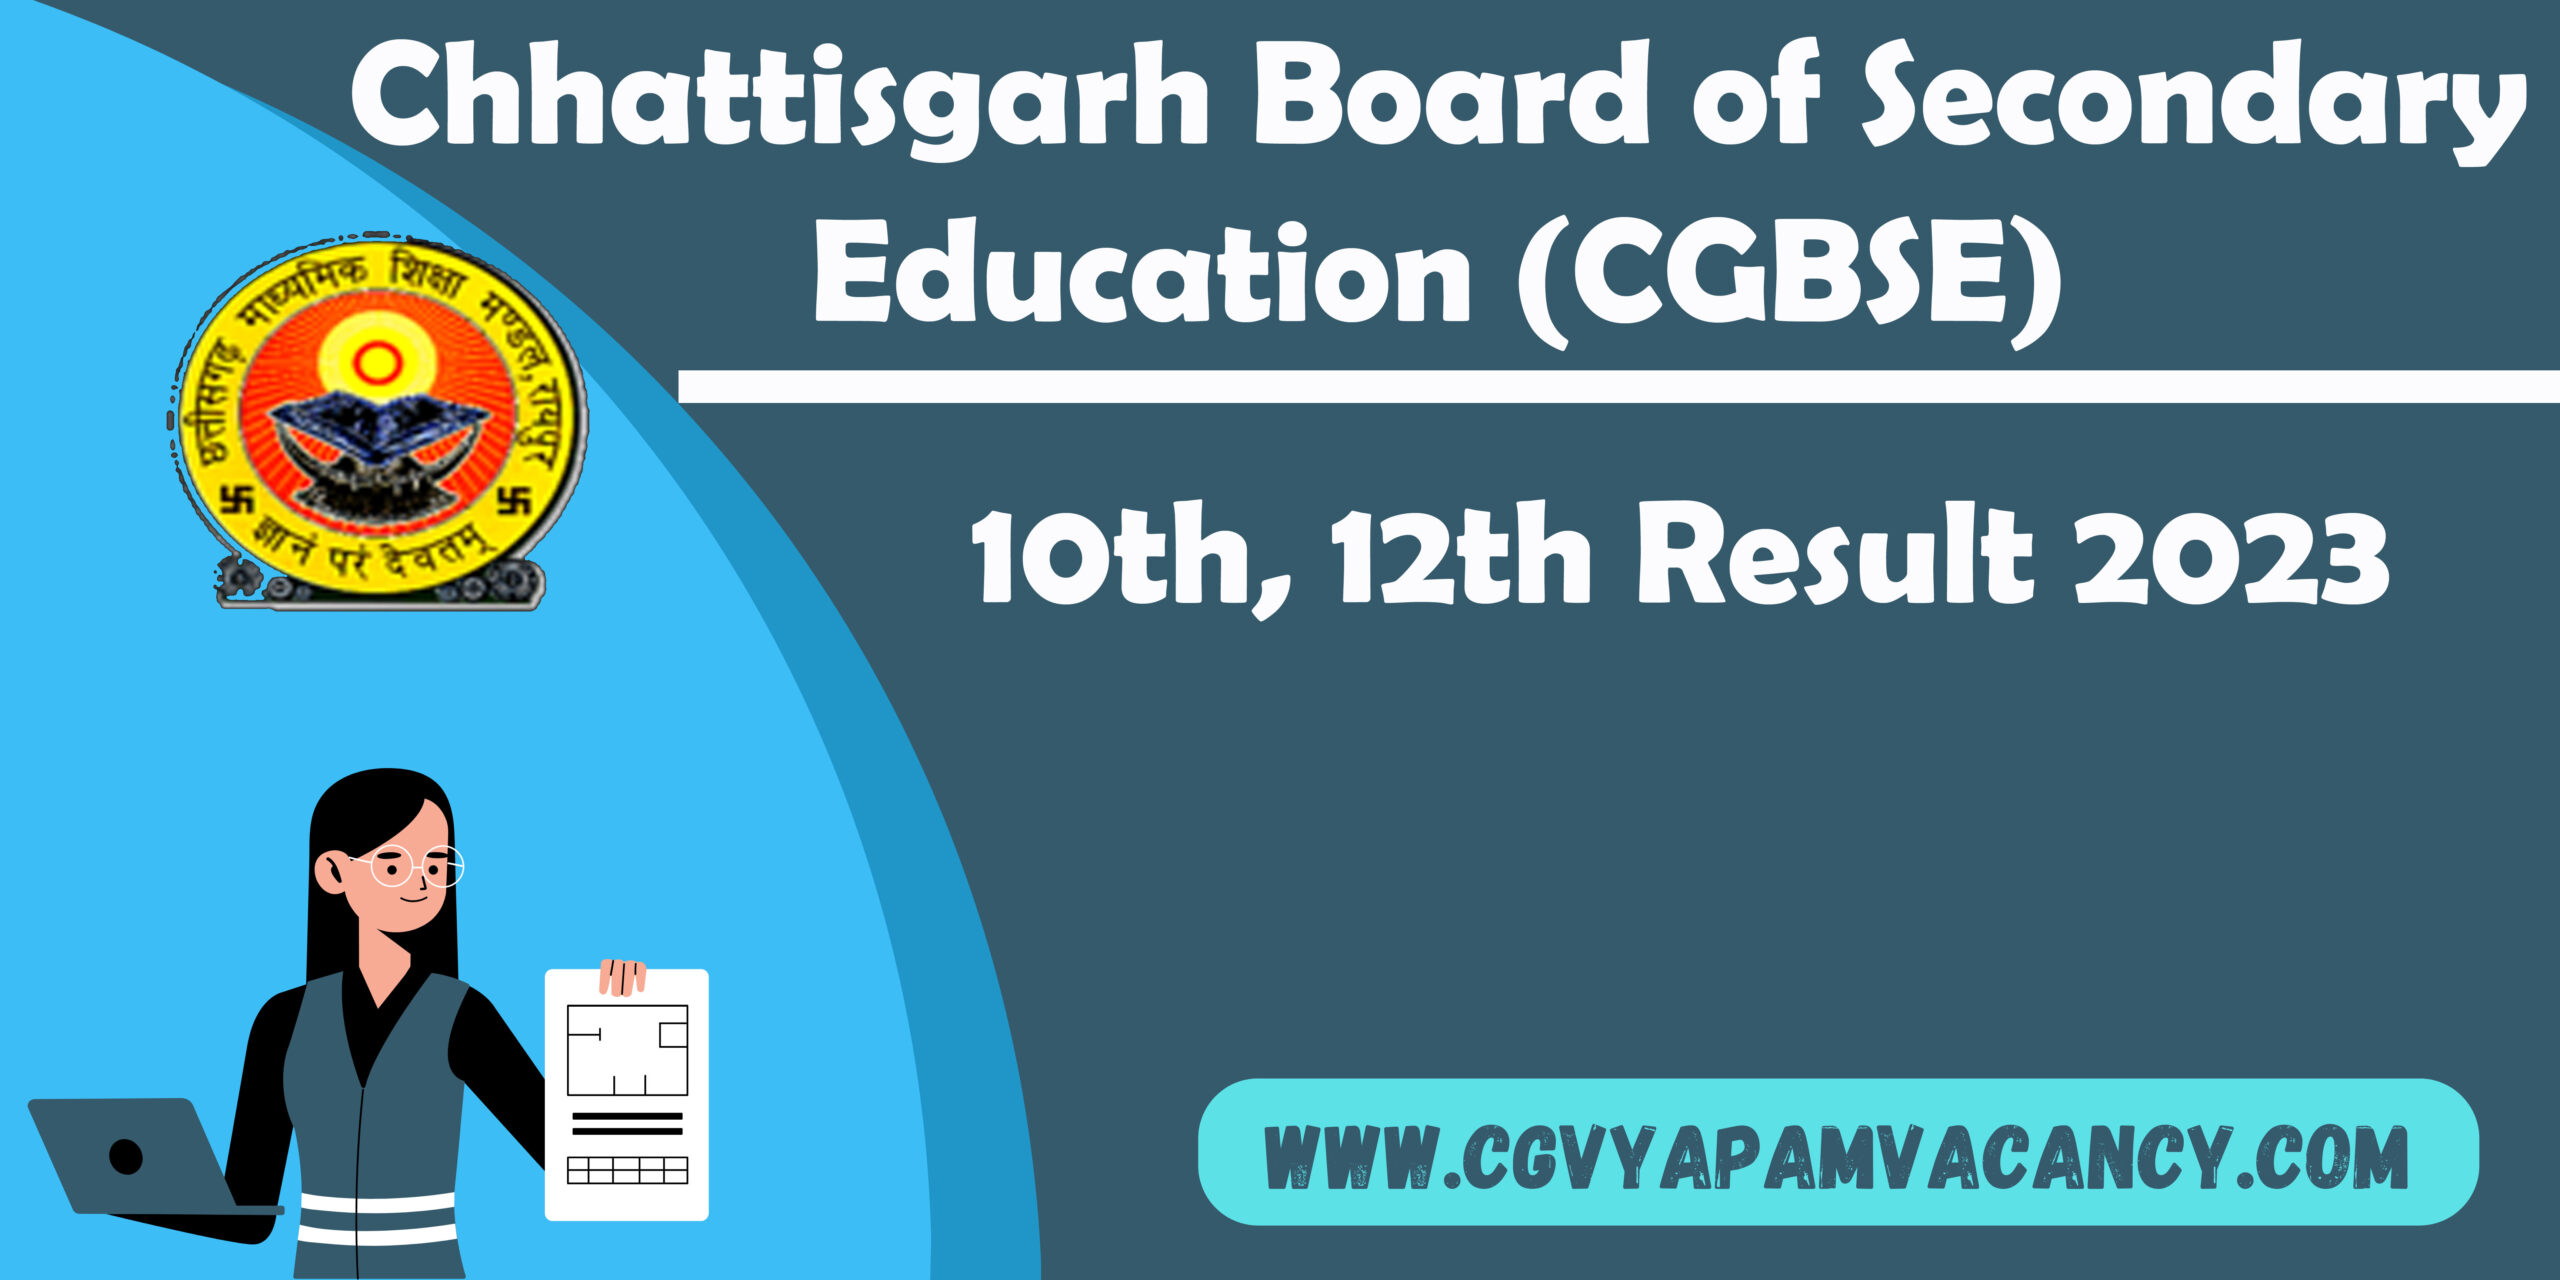 CGBSE Board 10th, 12th Result 2023